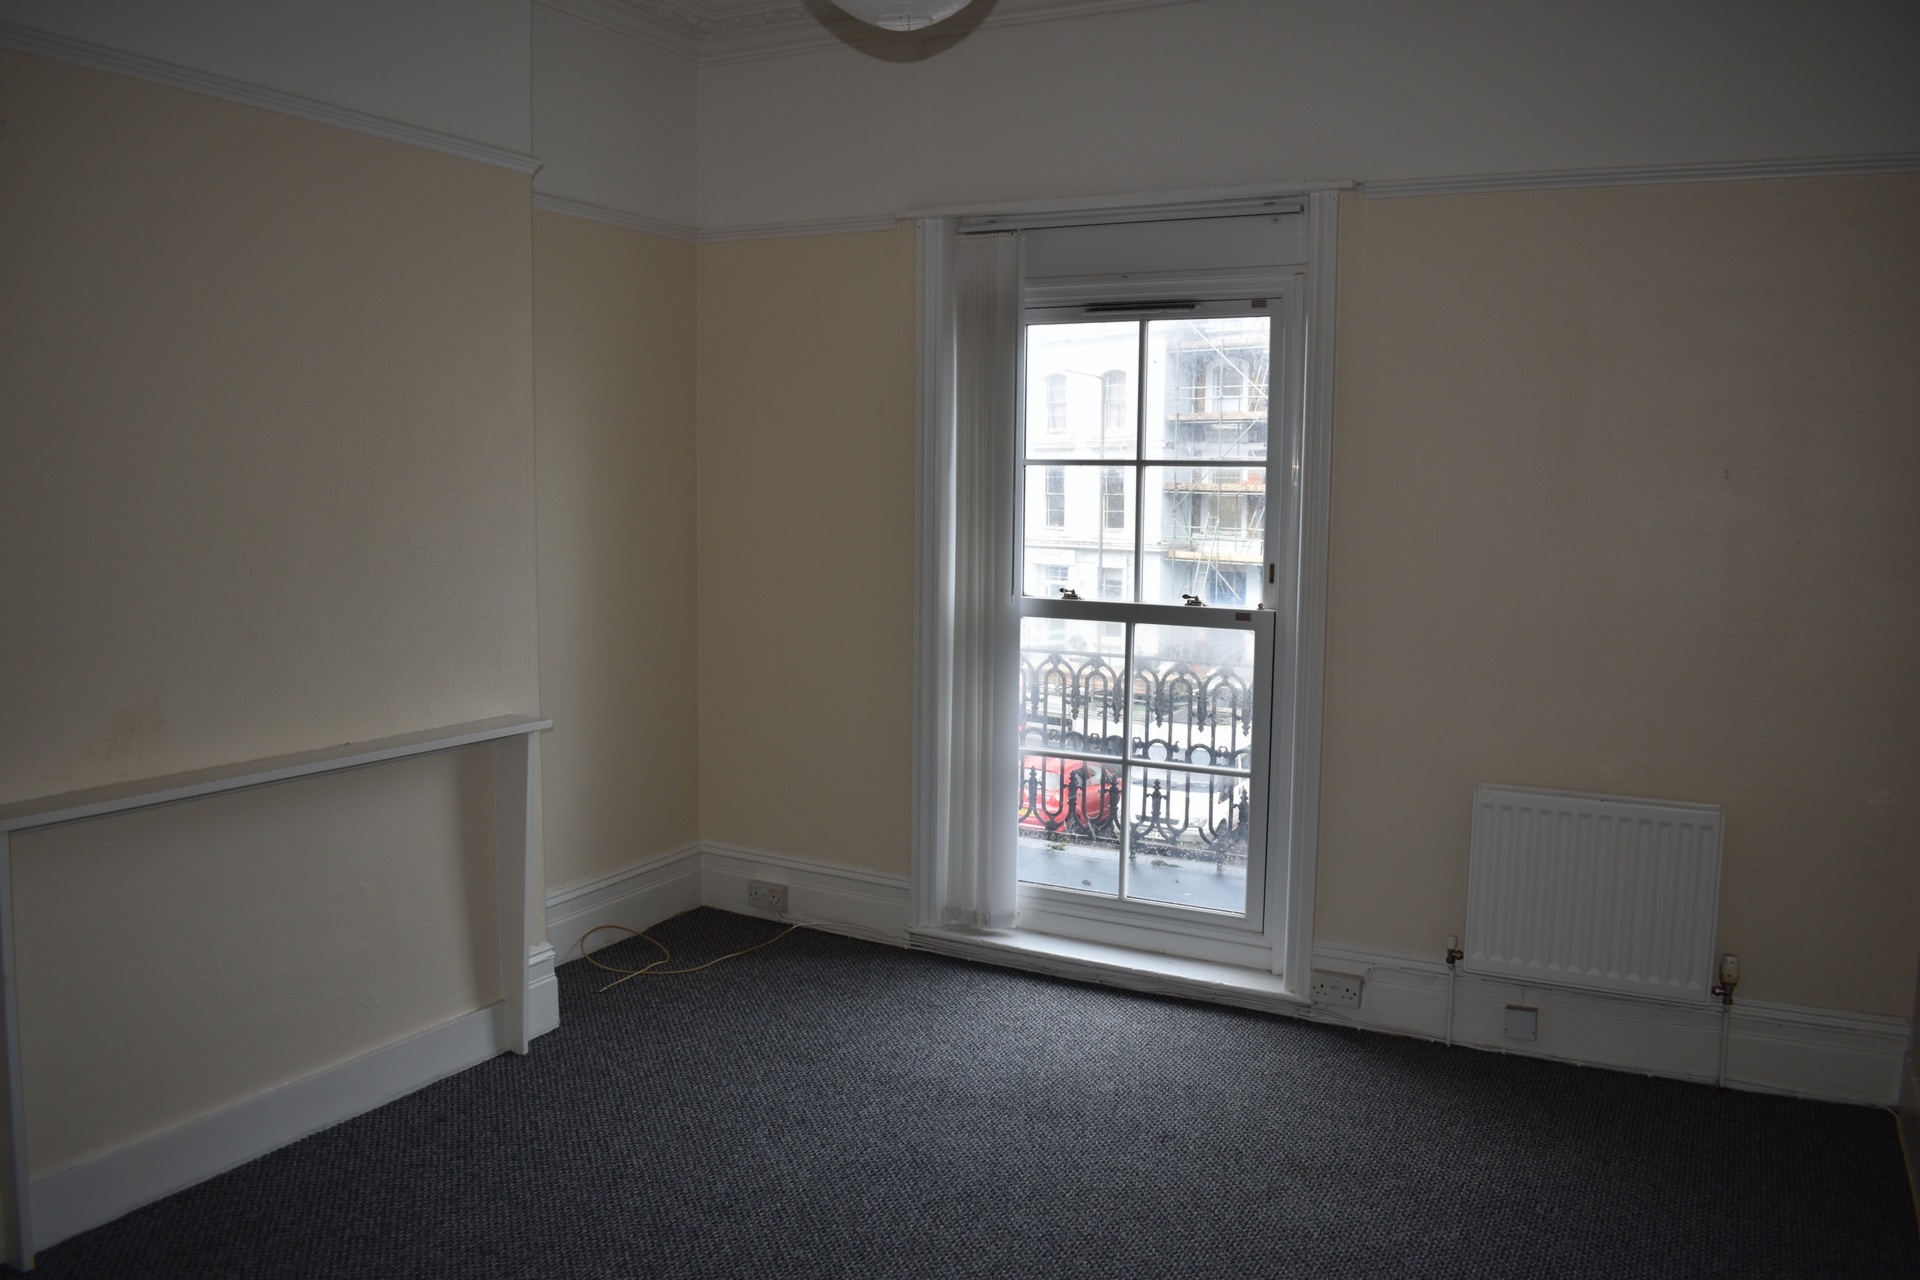 Sizable one bedroomed property located on Margate Seafront! Available now!